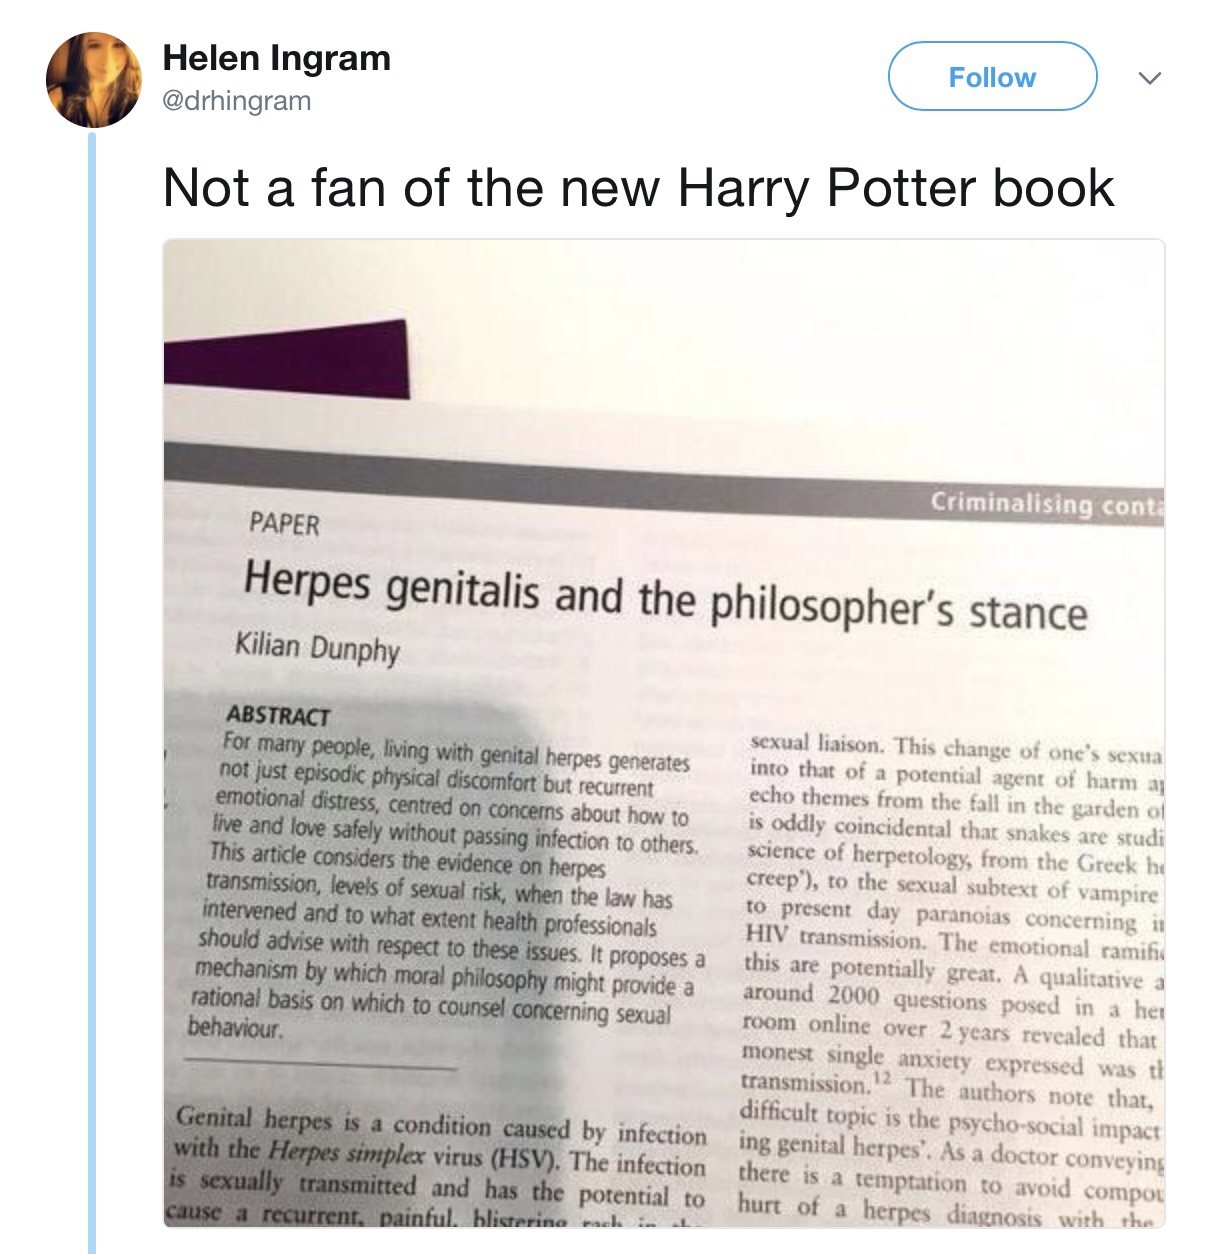 memes - pig - Helen Ingram Not a fan of the new Harry Potter book Criminalising conta Paper Herpes genitalis and the philosopher's stance Kilian Dunphy Abstract For many people, living with genital herpes generates not just episodic physical discomfort bu